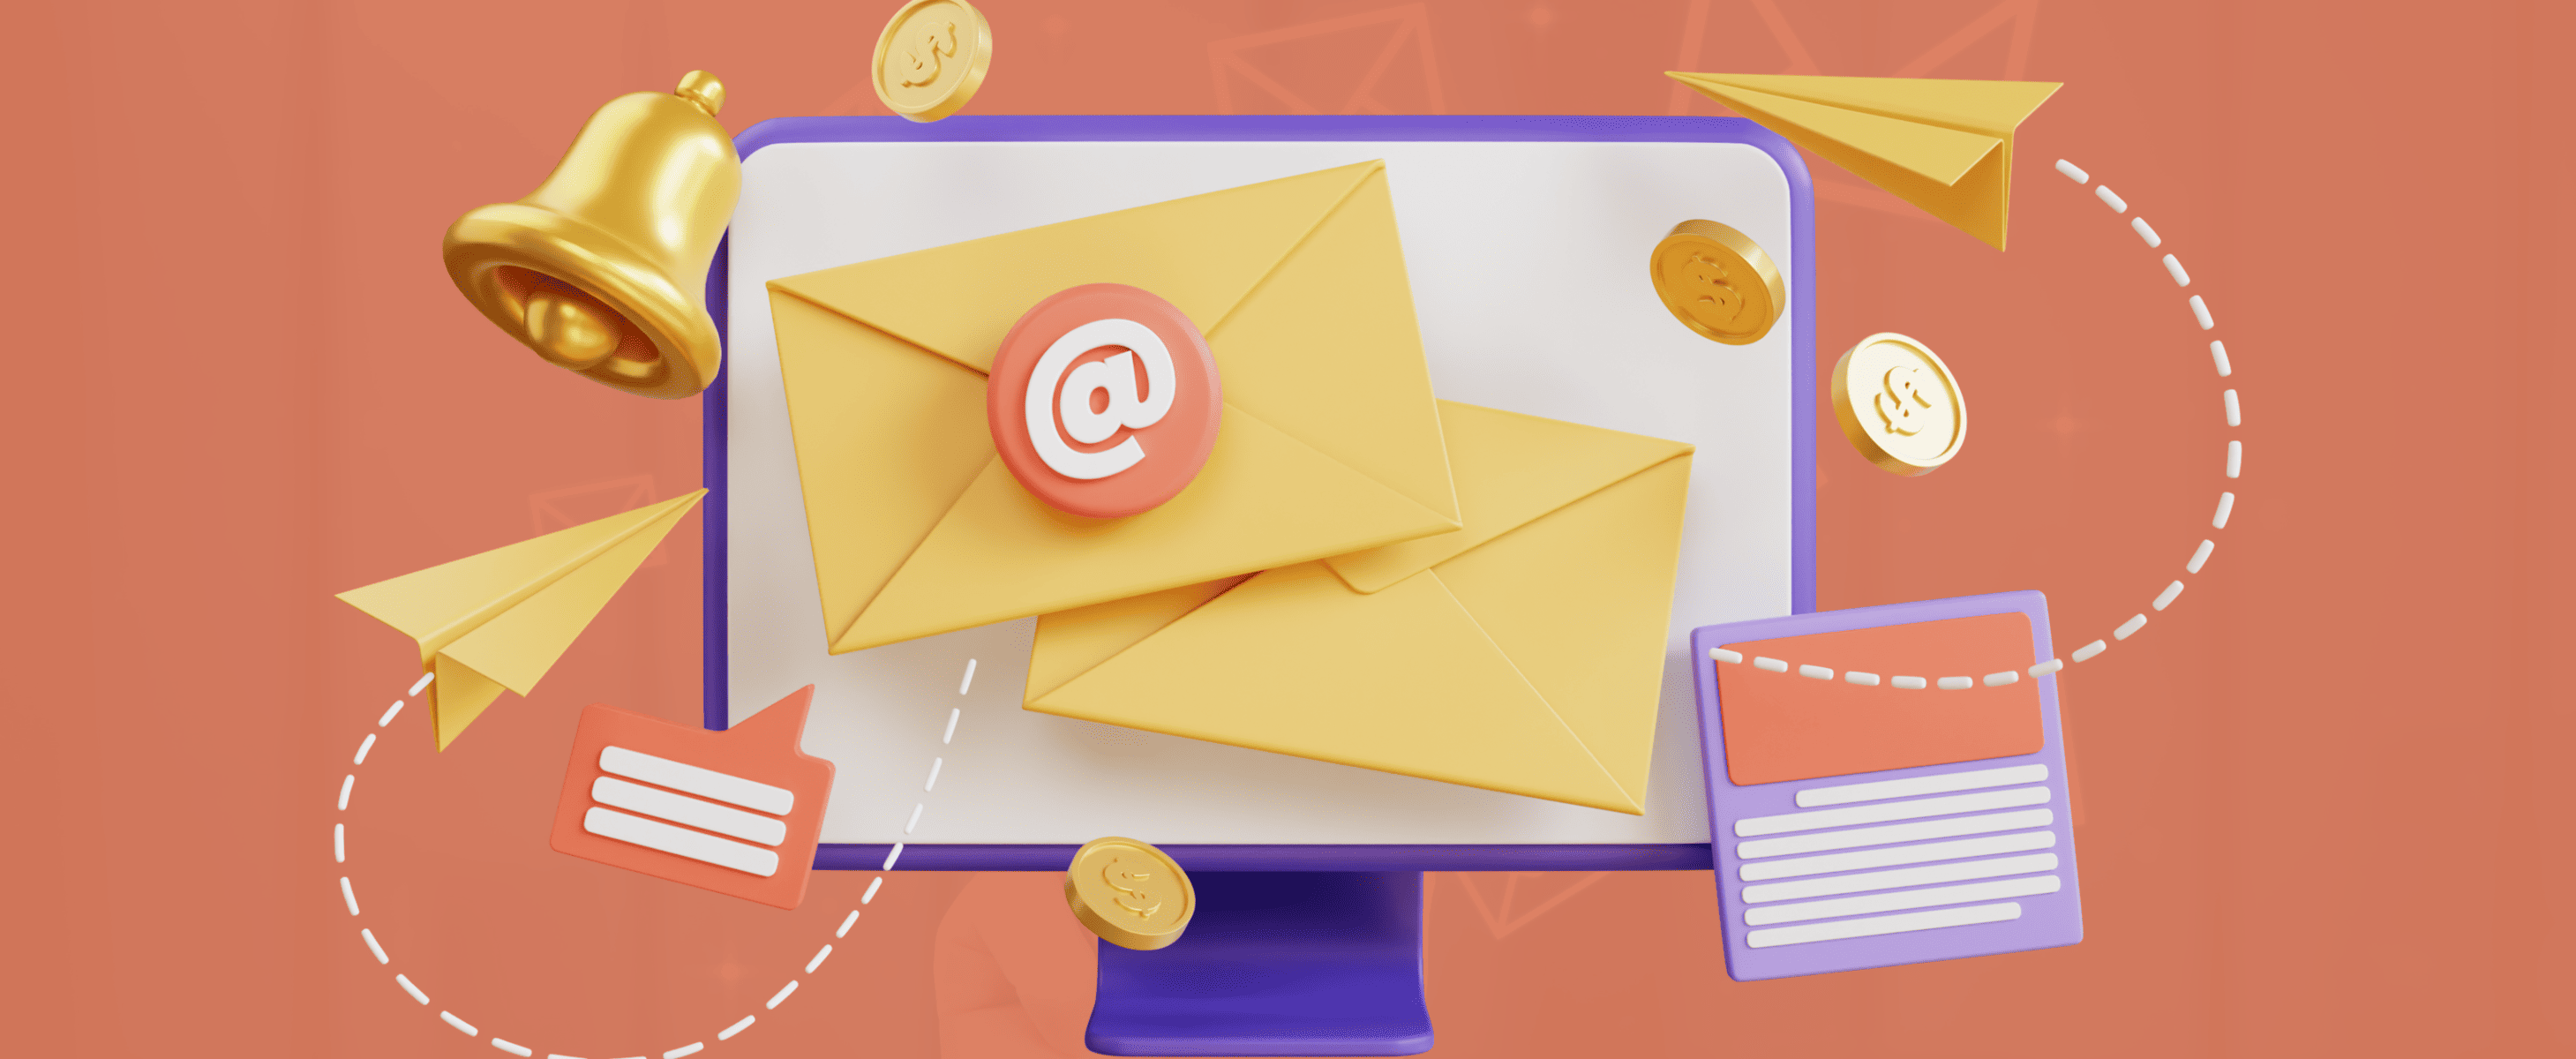 email marketing definition